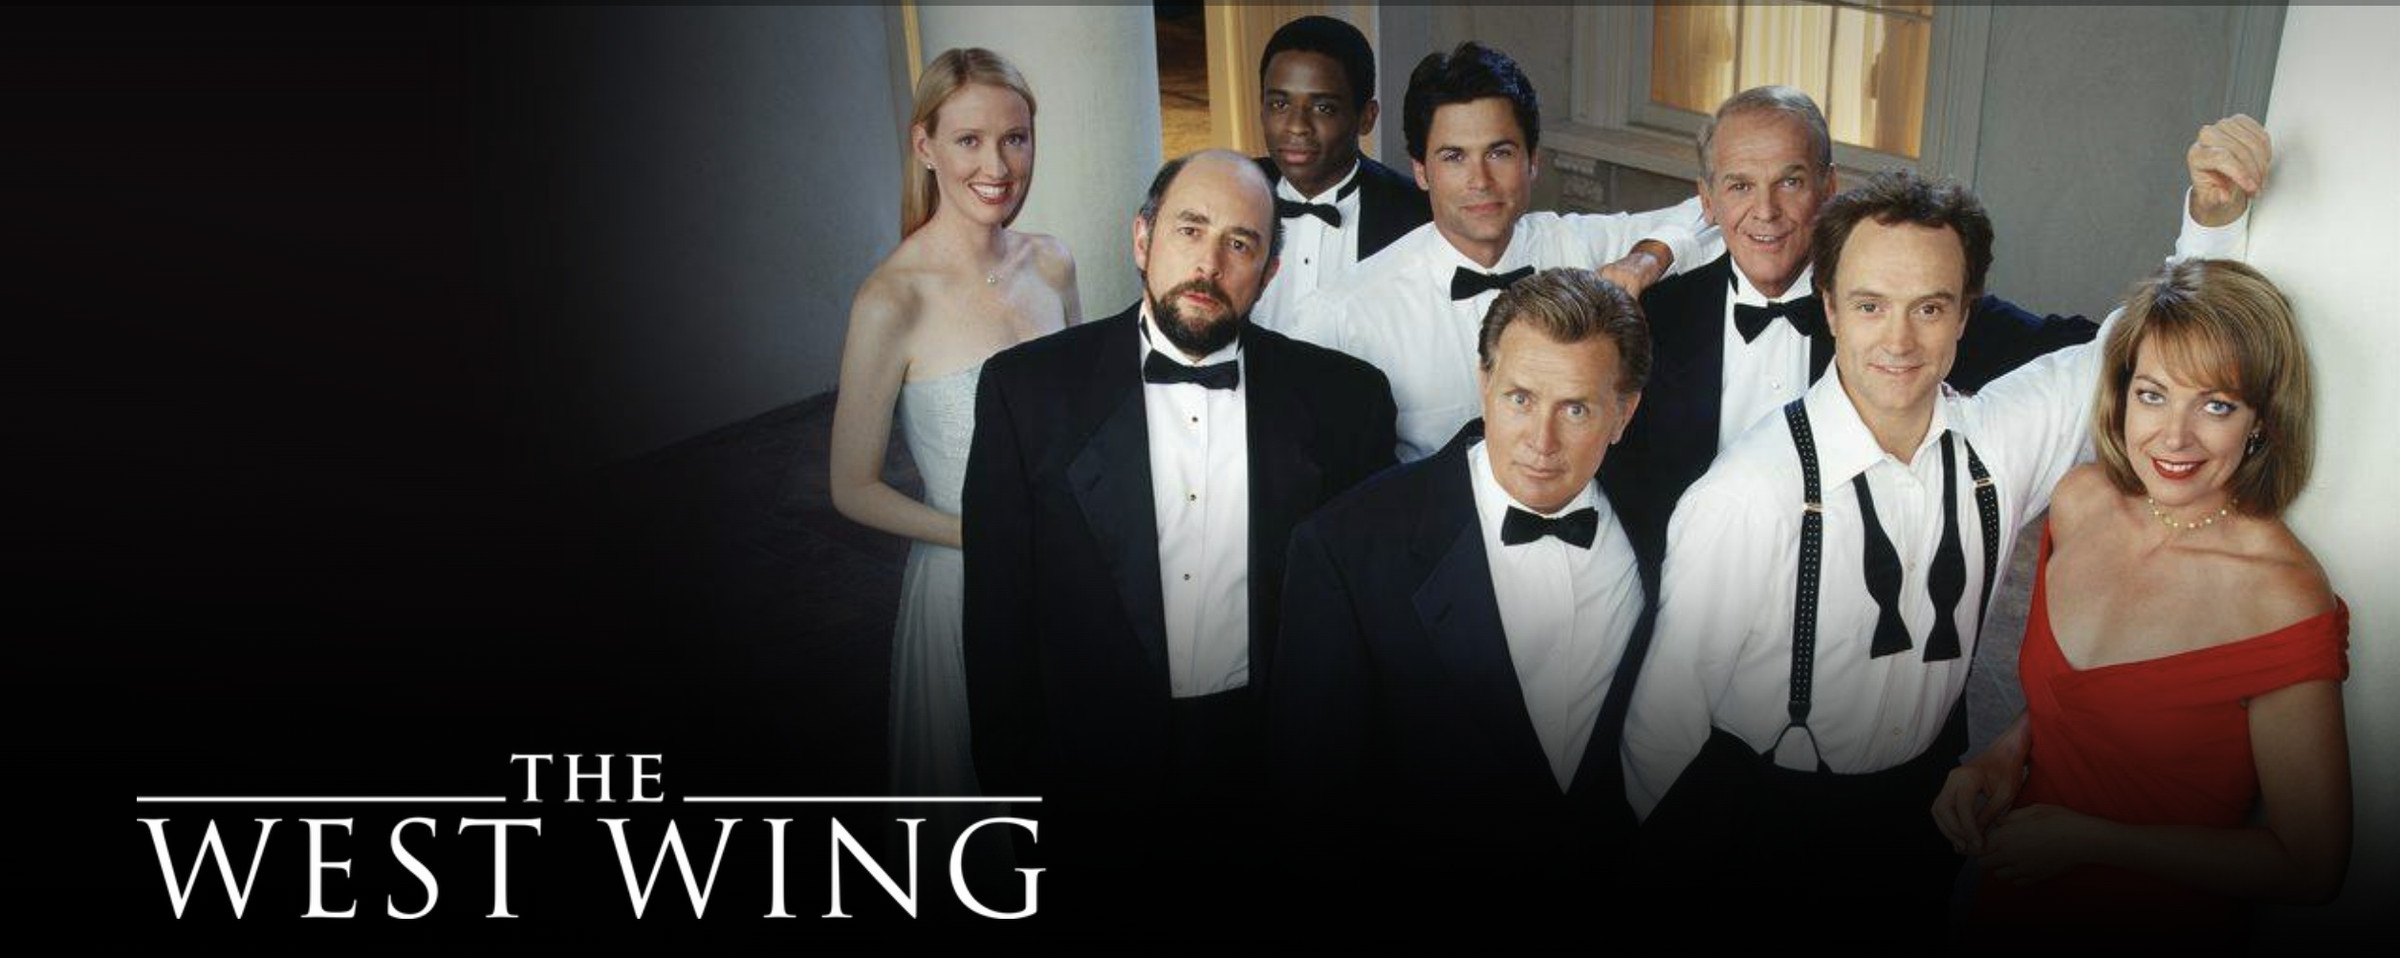 Promo photo with “The West Wing” in lower left and cast in formal clothes center right.